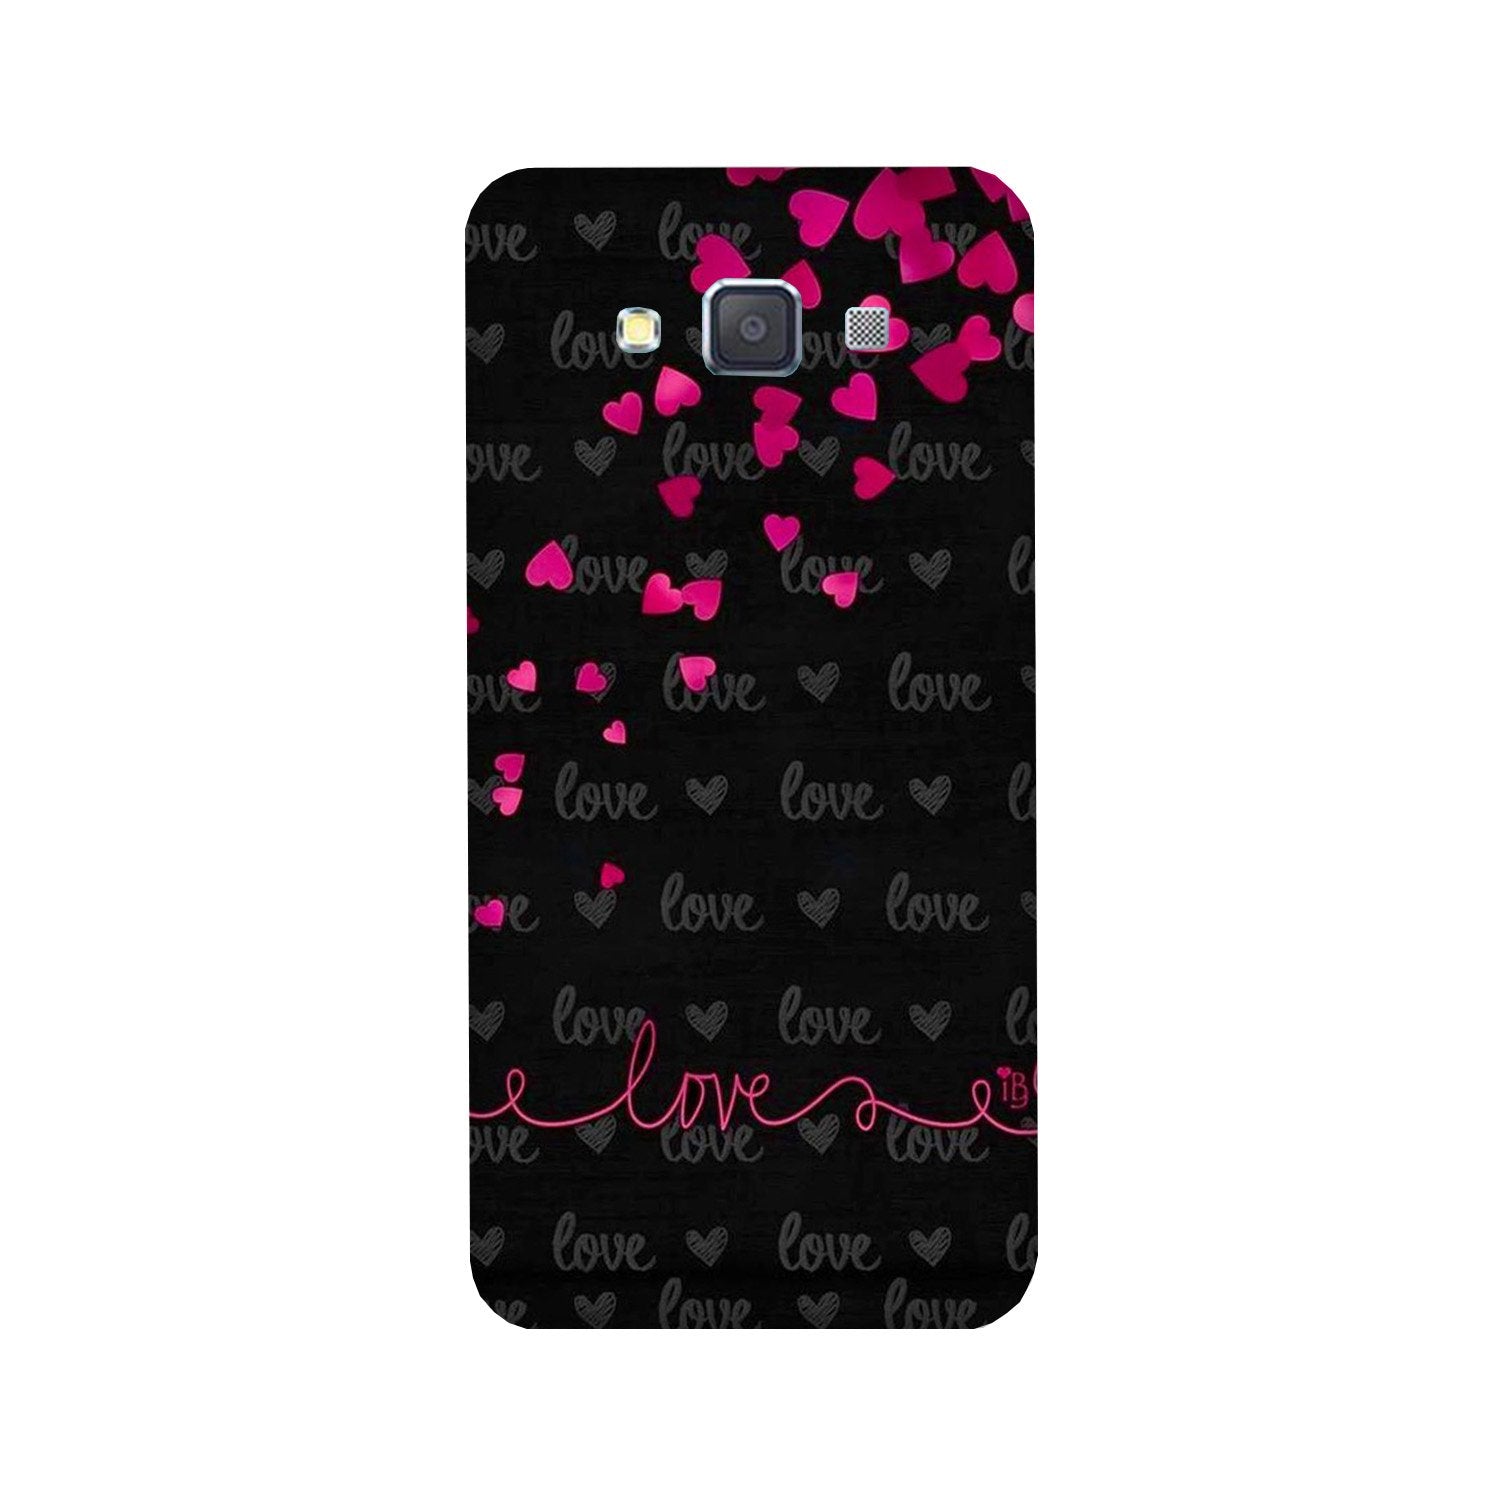 Love in Air Case for Galaxy ON5/ON5 Pro